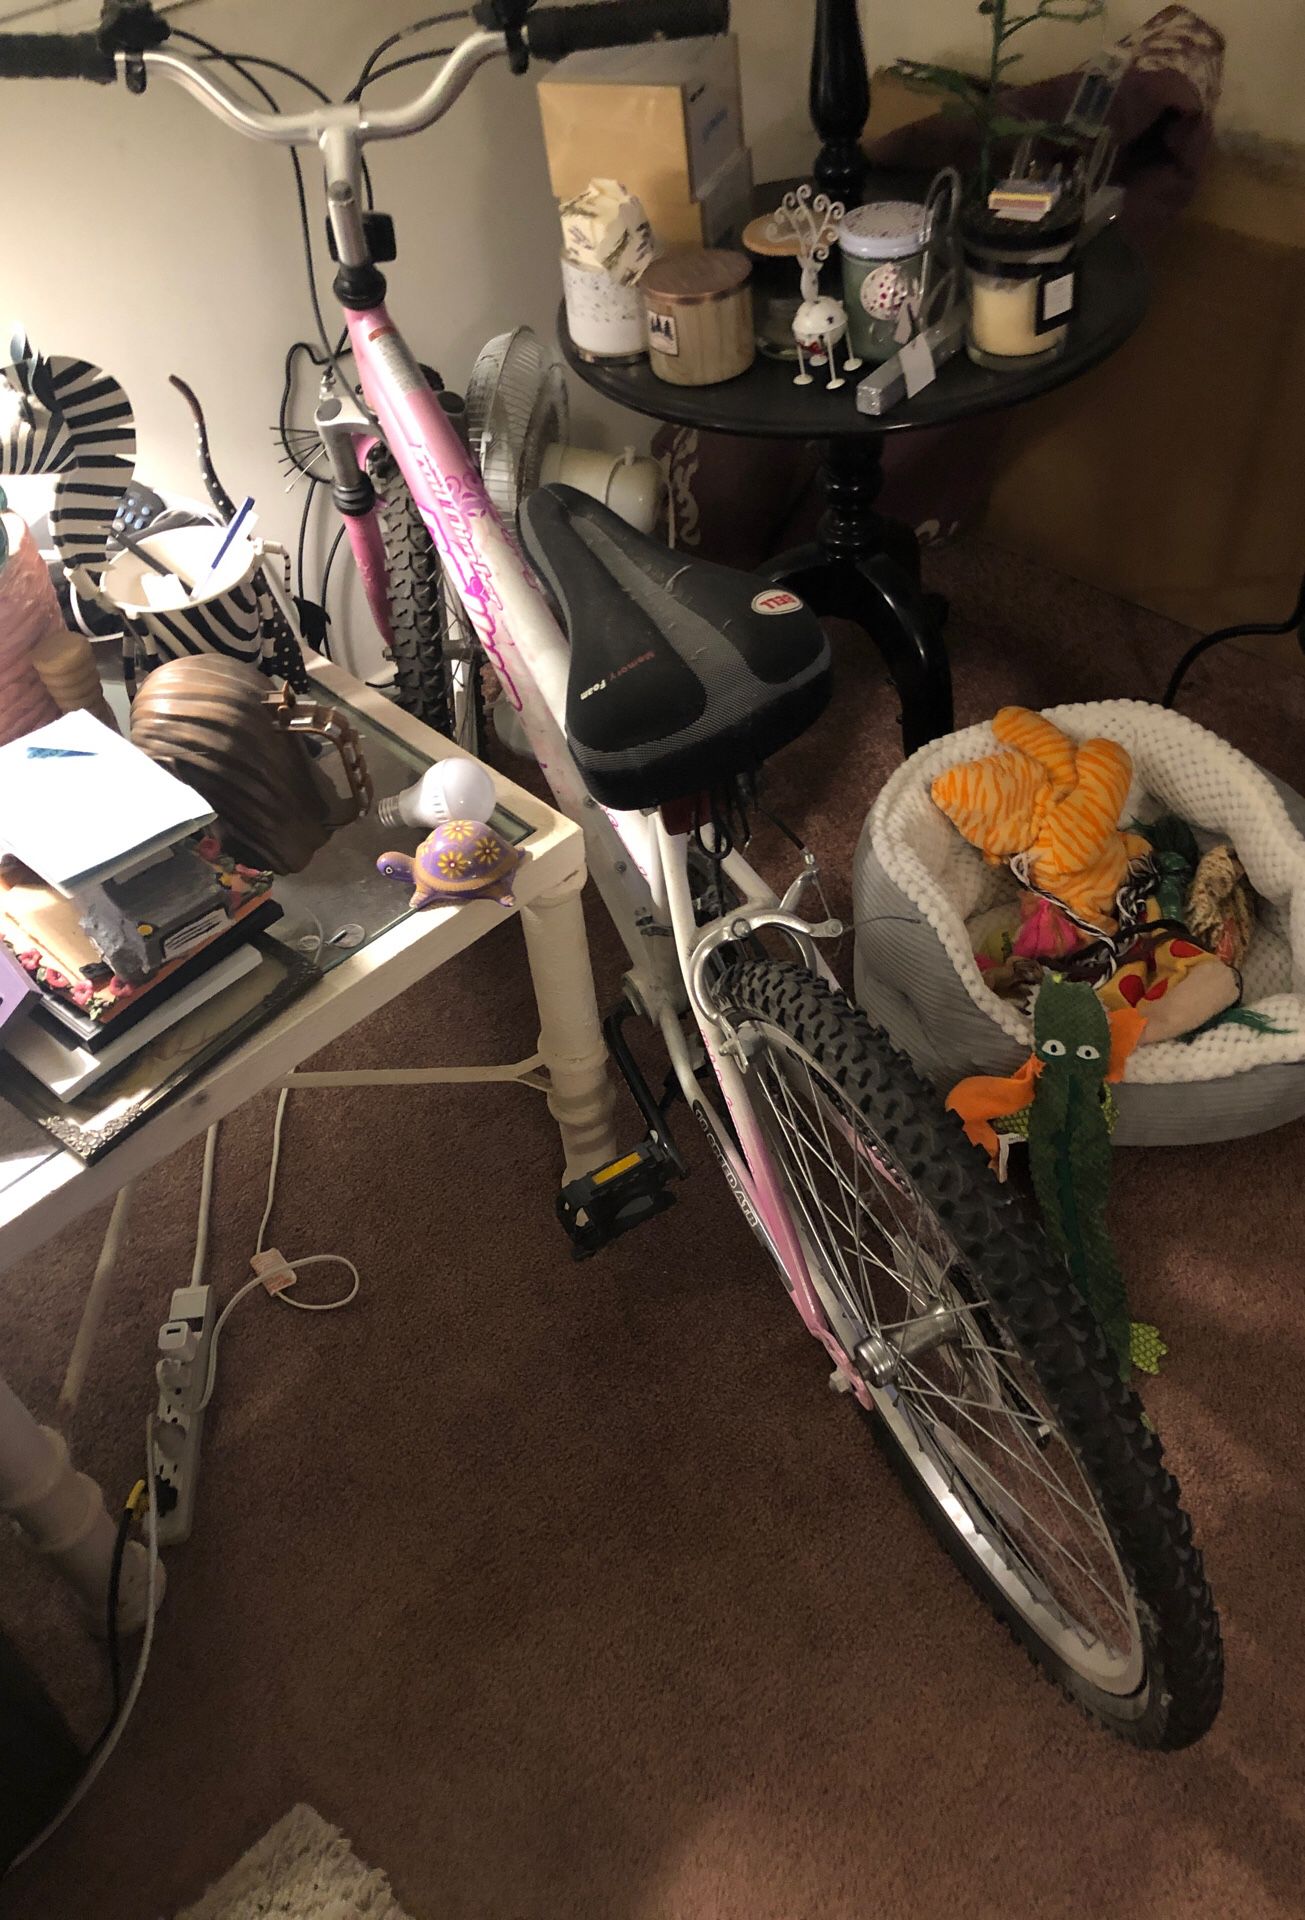 My girls bike used like 3 times. Perfect condition. Kept in laundry room but no room any longer they remodeled!!! Just needs air in tires because I h